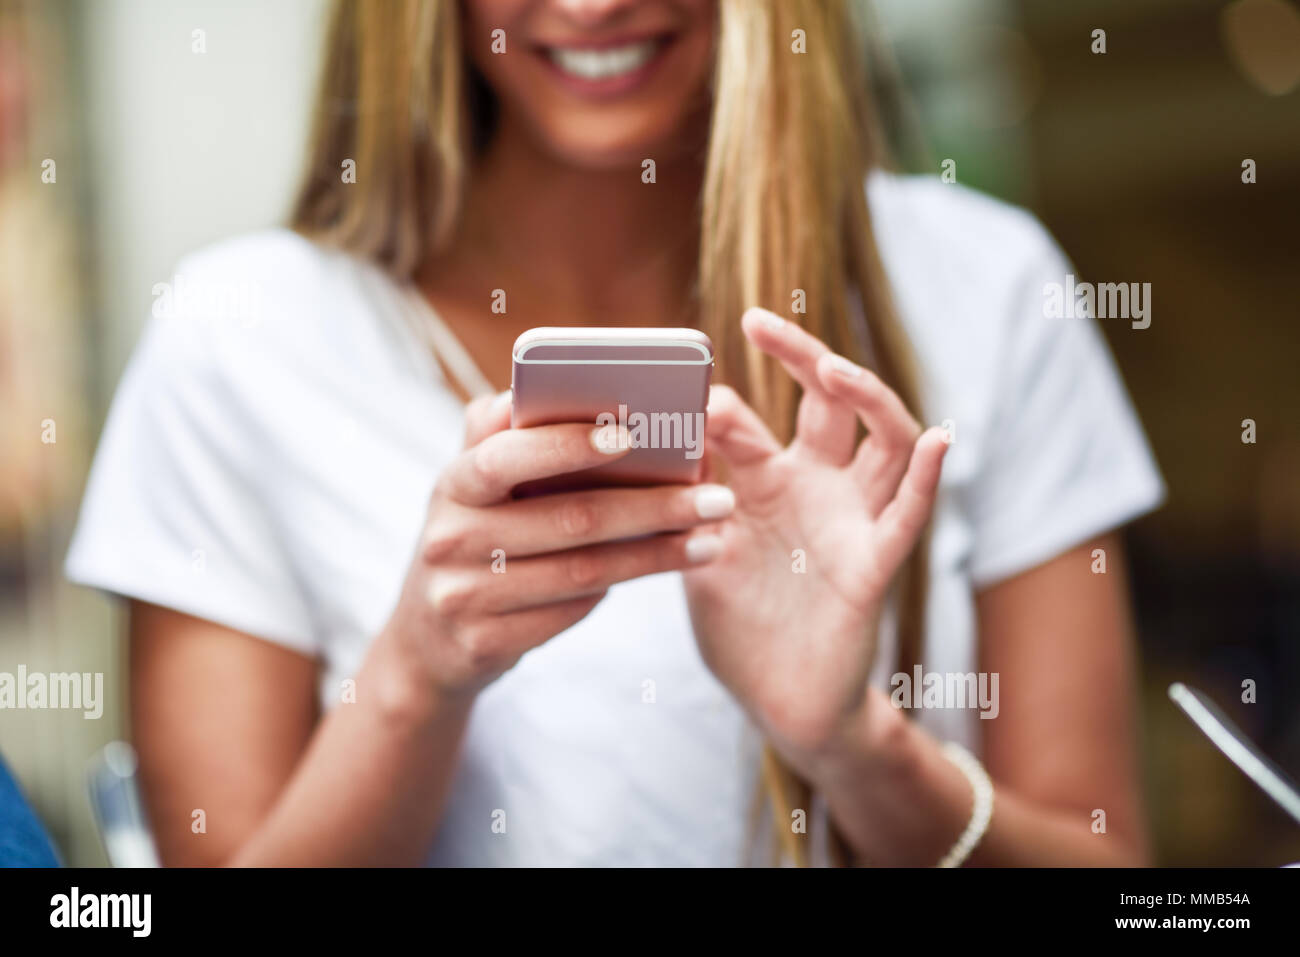 Close-up image of young blonde girl texting with smartphone, female hands typing text message via cellphone, social networking concept Stock Photo